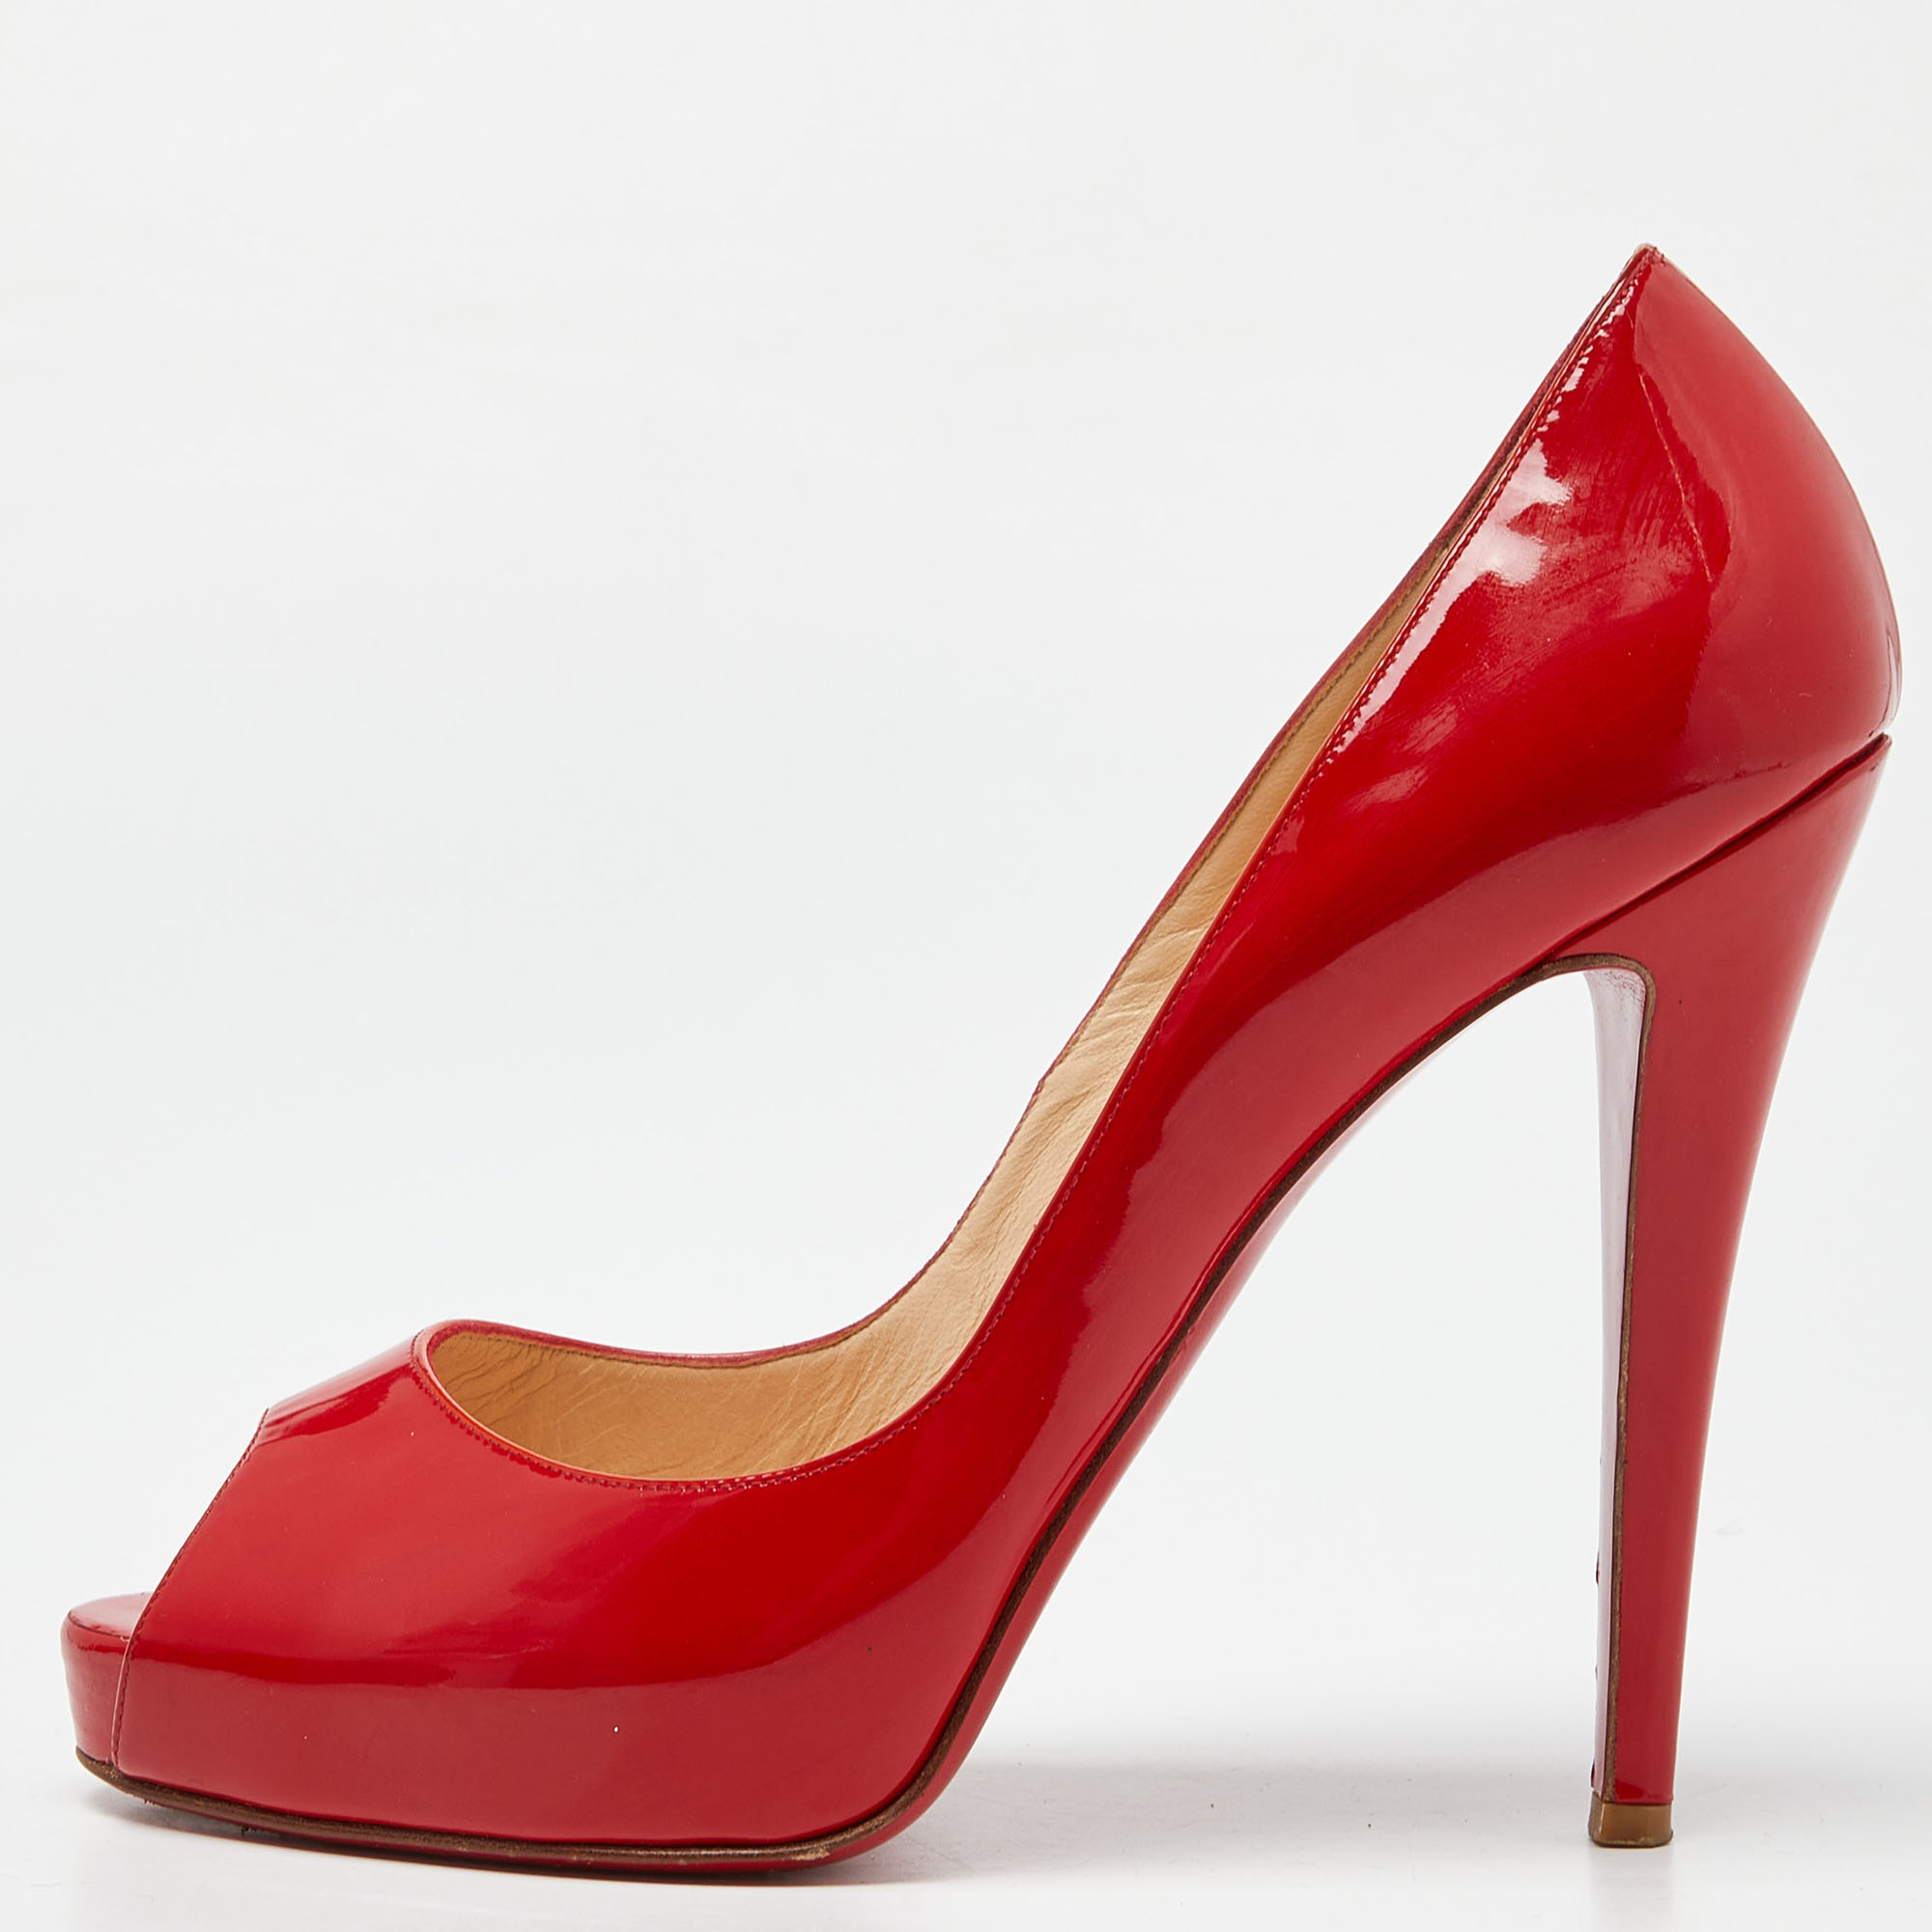 This pair of Christian Louboutin pumps is a timeless classic. Step out in style while flaunting these coral red patent leather pumps ideal for special occasions. They feature peep toes smooth insoles and 13cm heels.